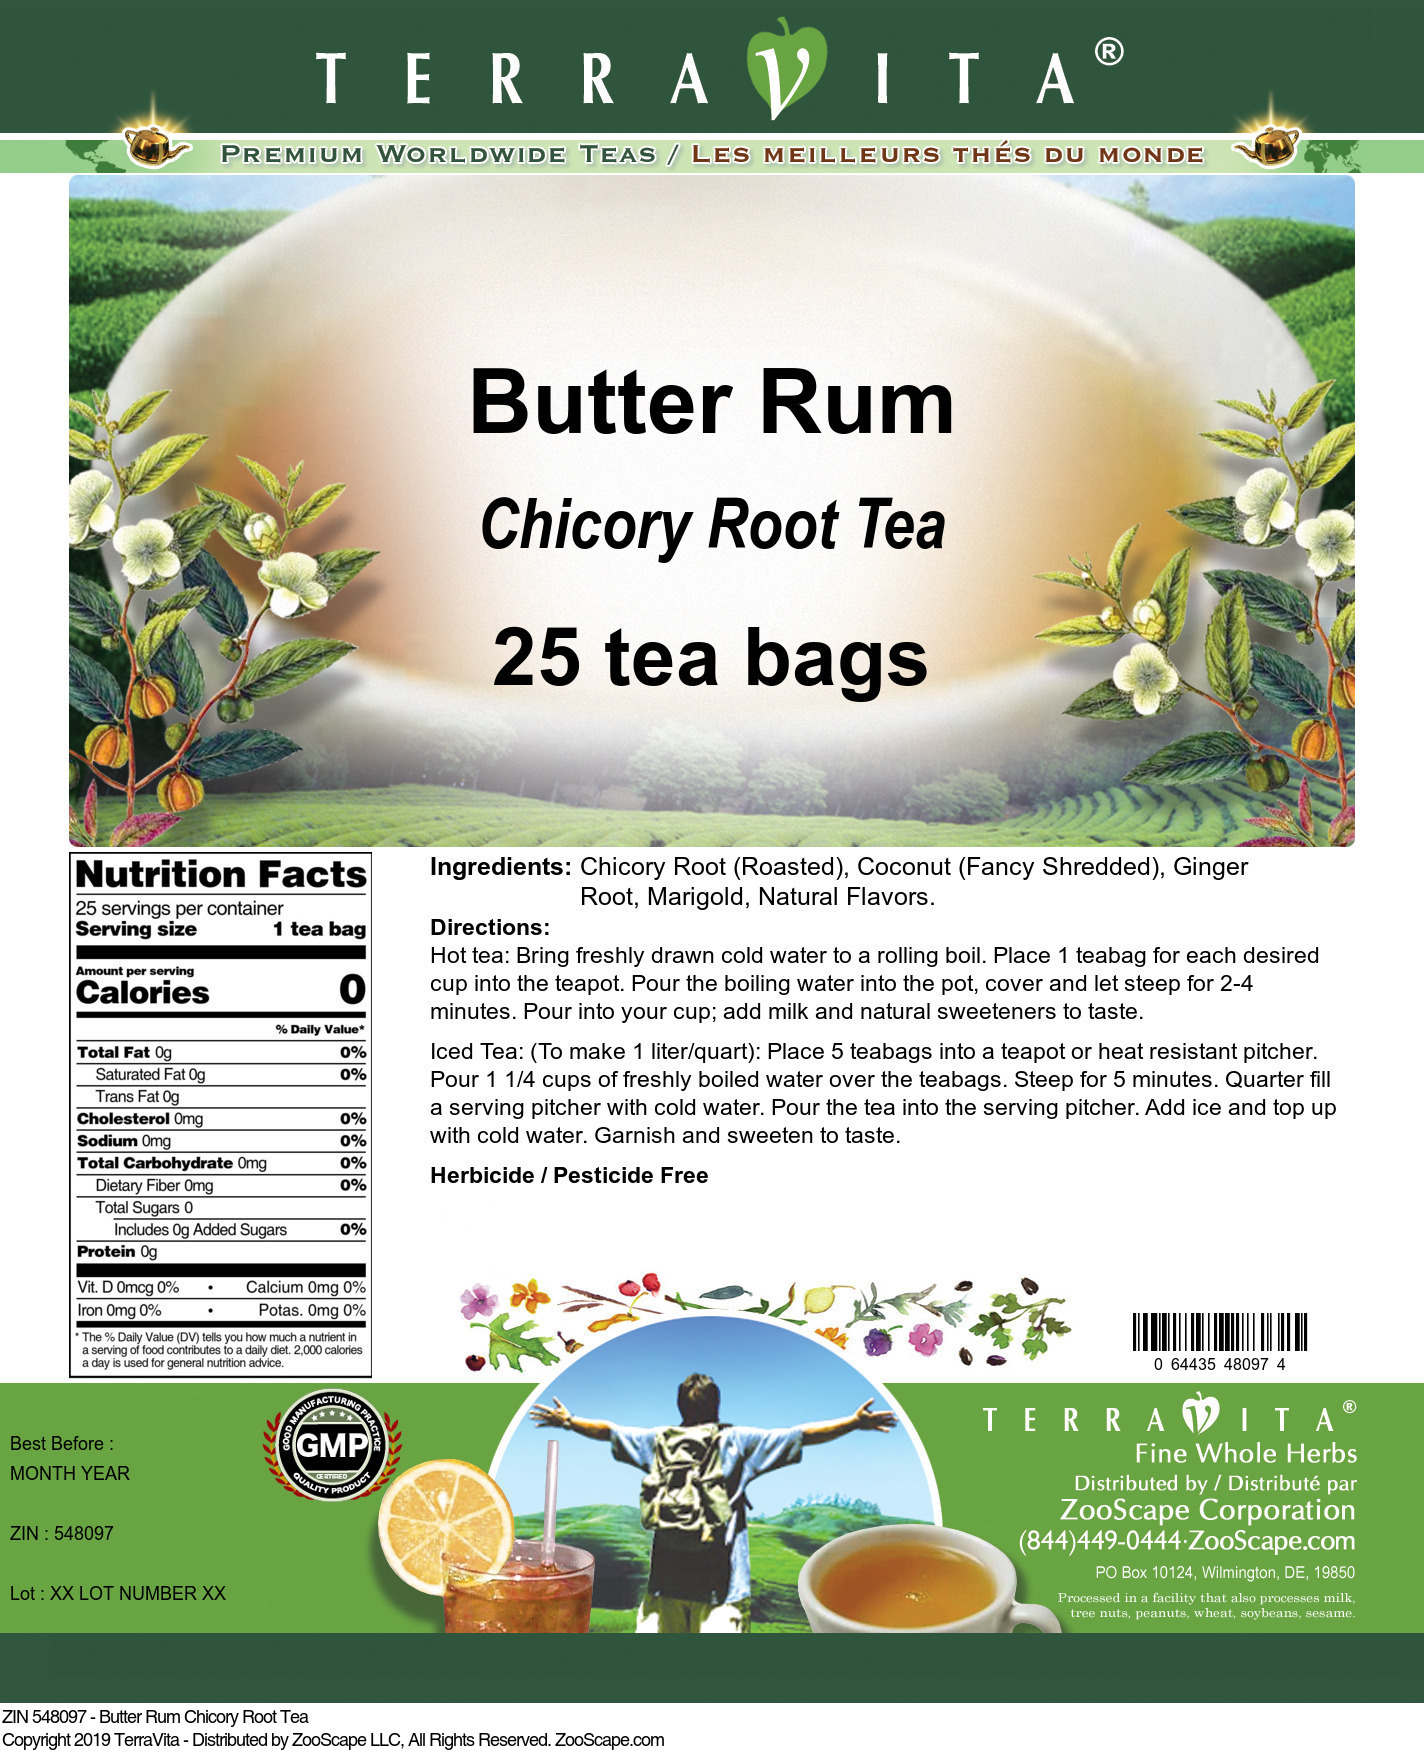 Butter Rum Chicory Root Tea - Label